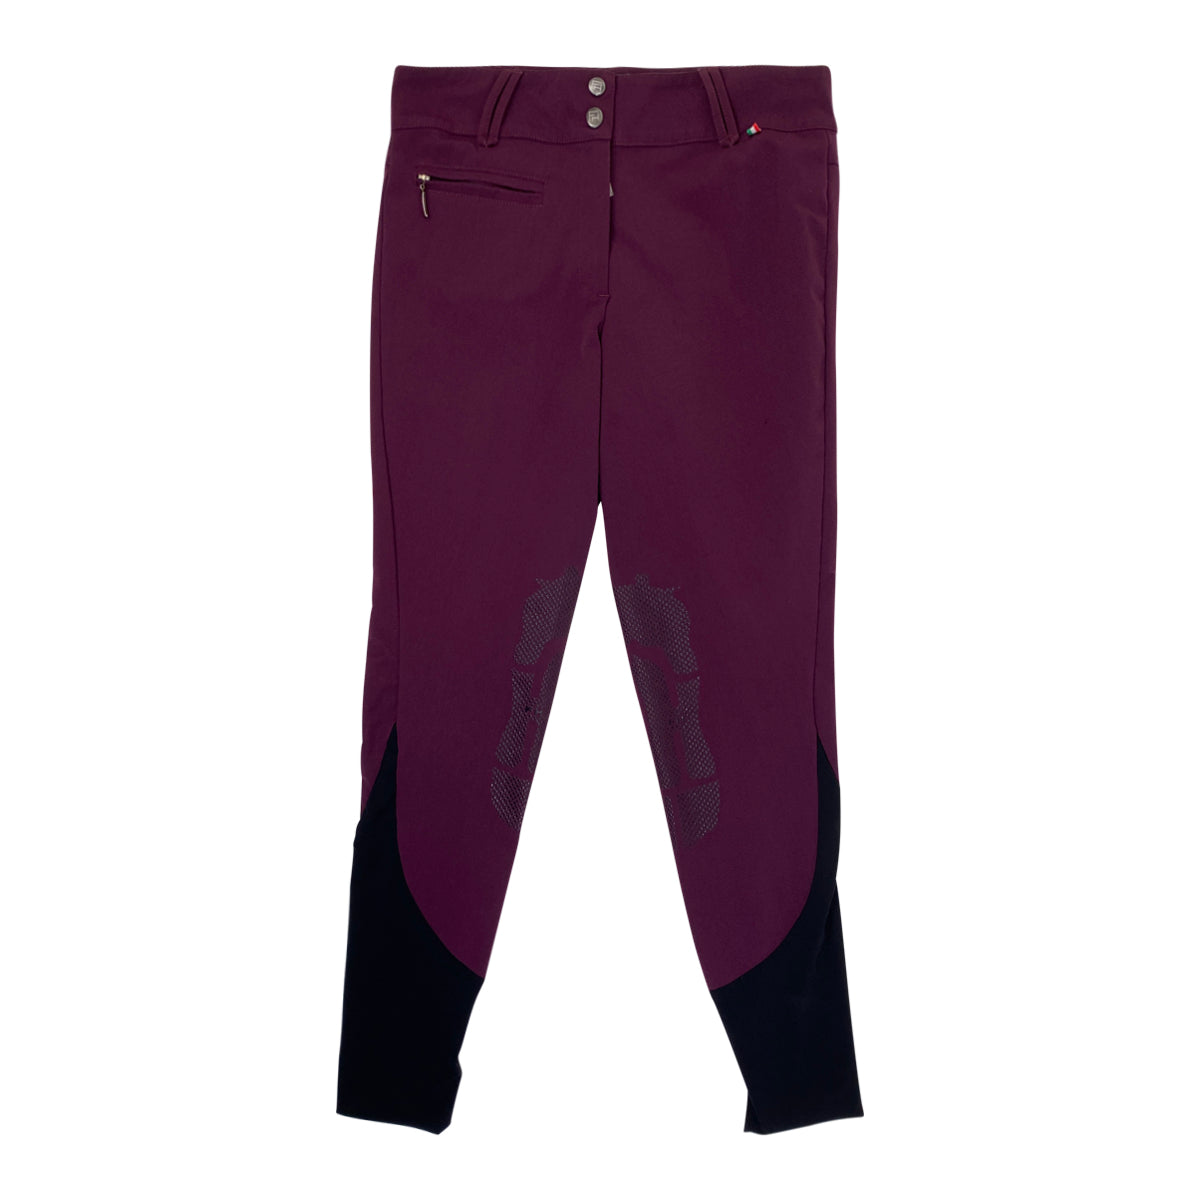 For Horses 'Emma' Breeches in Mulberry